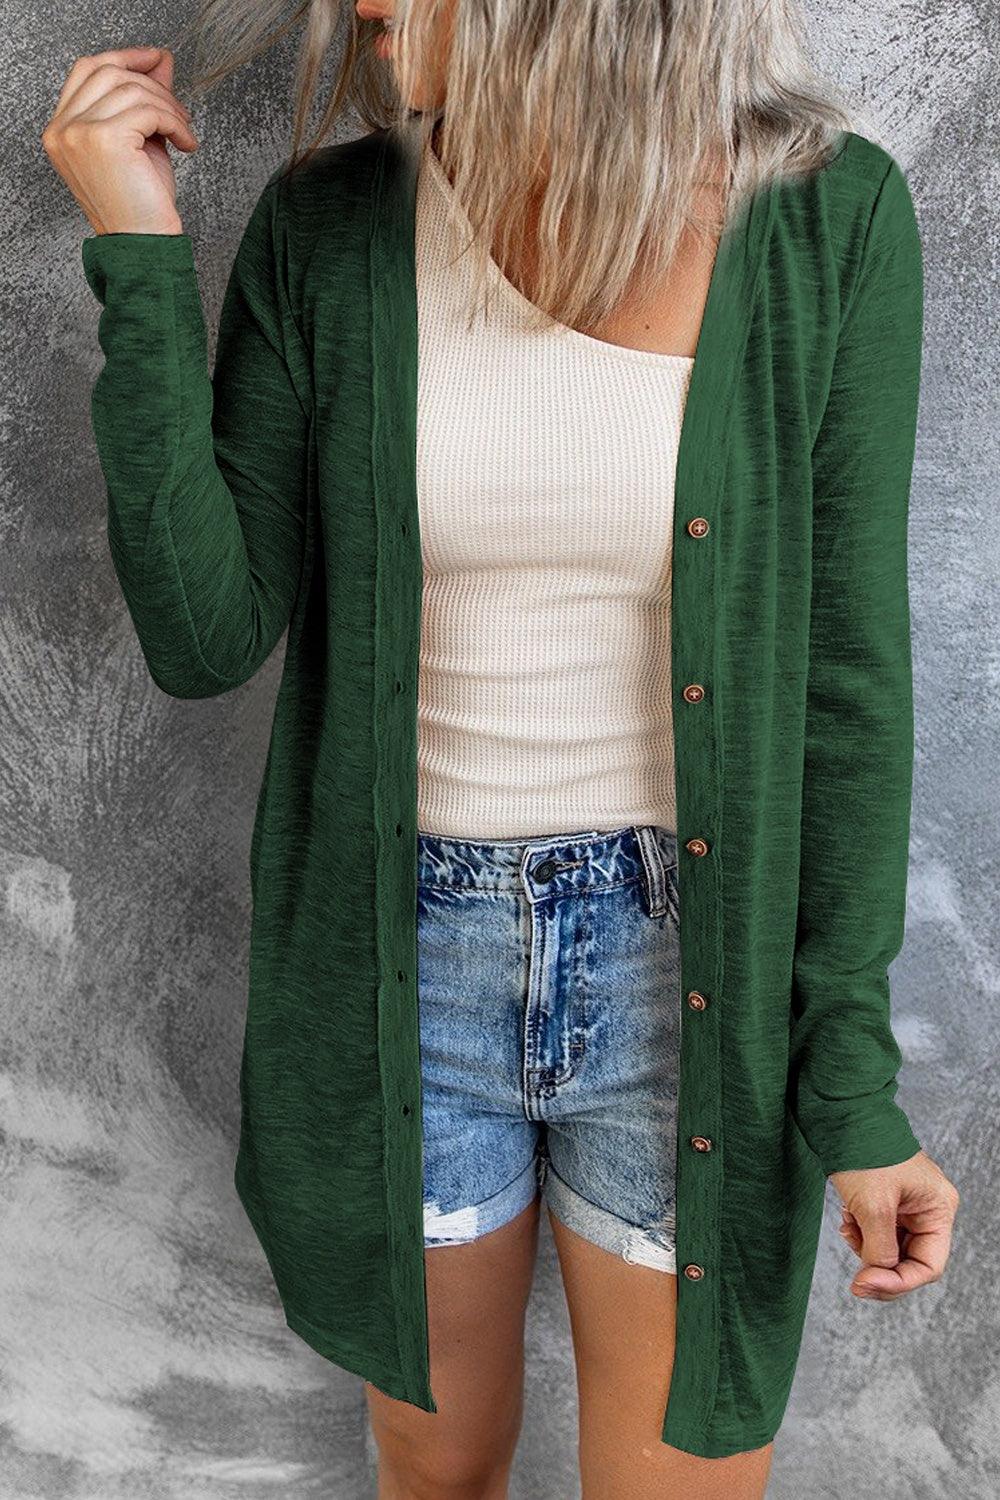 a woman wearing a green cardigan and denim shorts